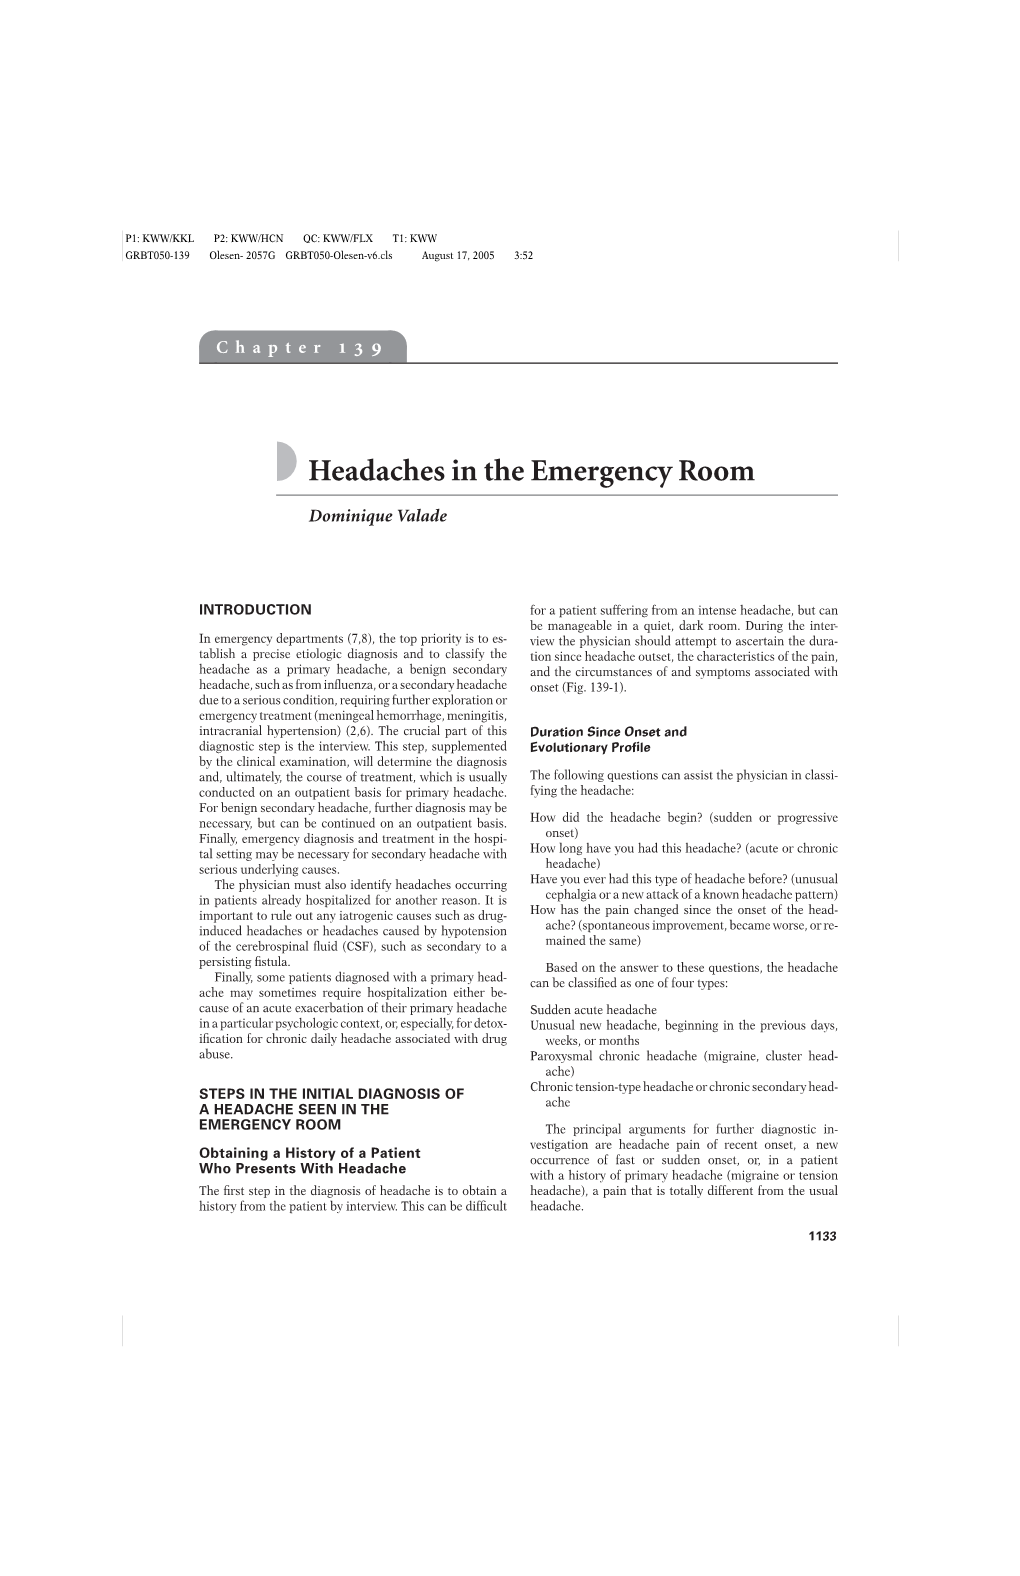 Headaches in the Emergency Room